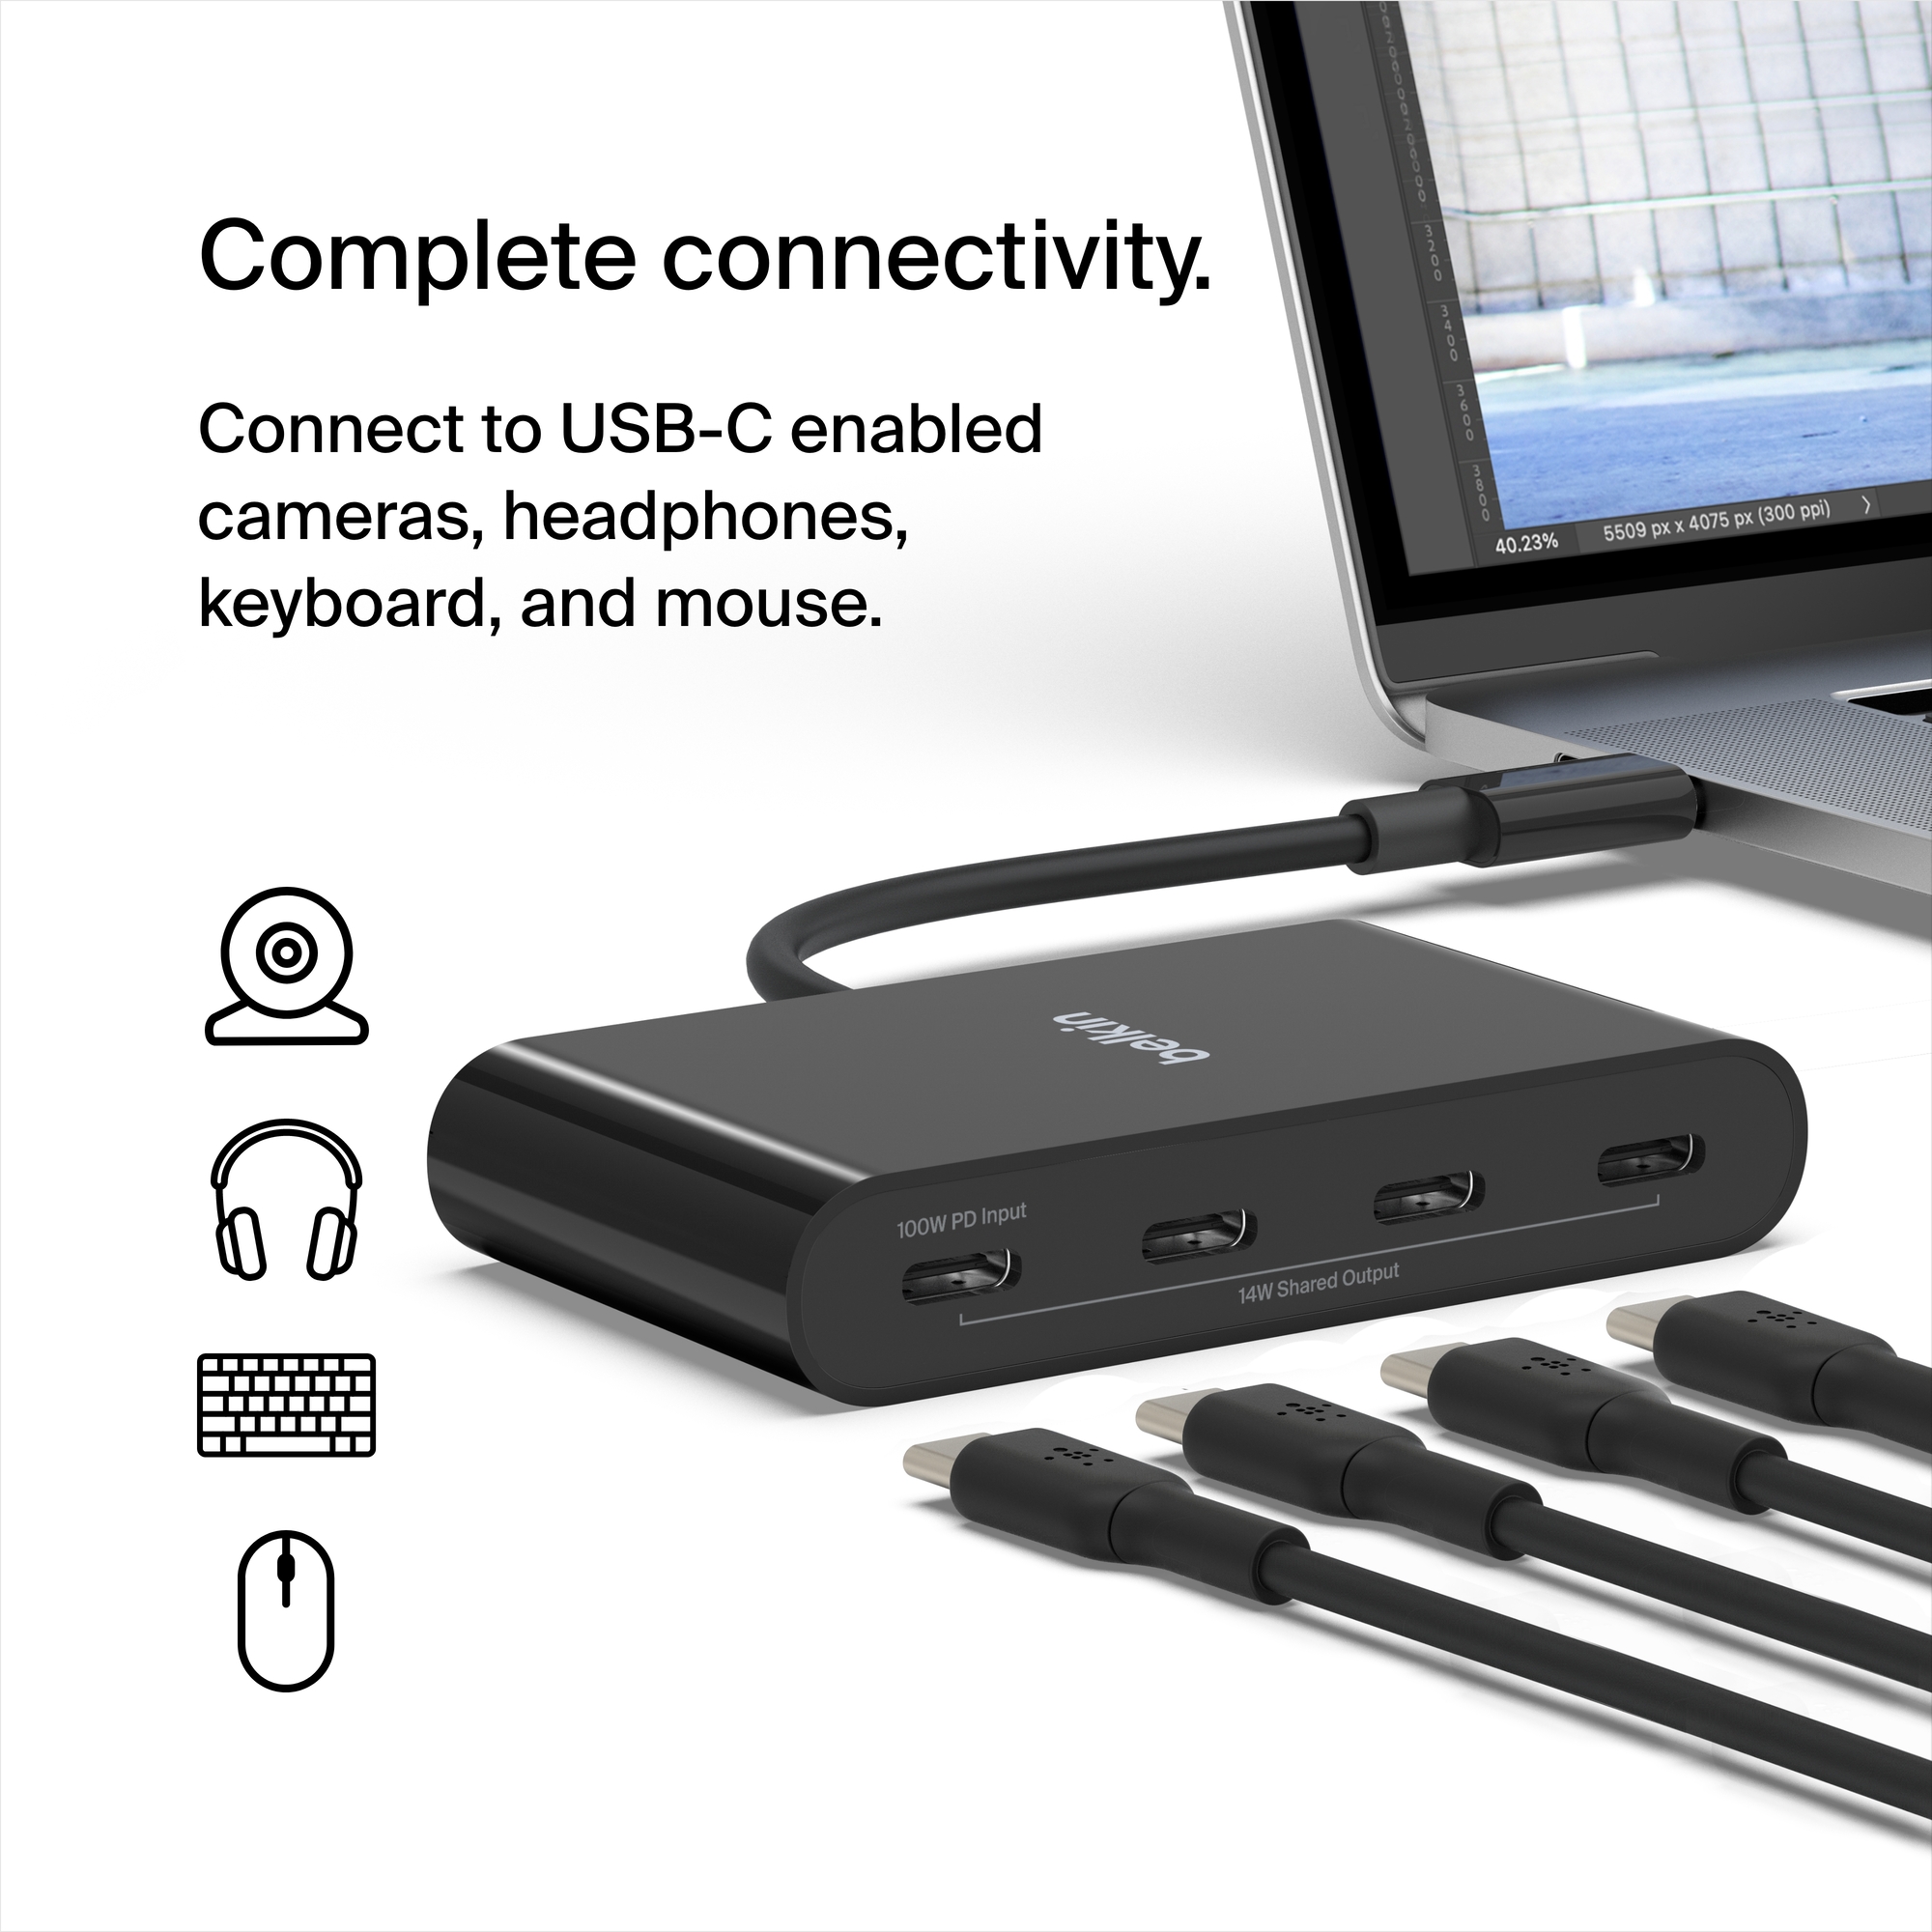 Belkin Connect USB-C™ to 4-Port USB-C Hub, Multiport Adapter Dongle with 4 USB-C 3.2 Gen2 Ports & 100W PD with Max 10Gbps High Speed Data Transfer for MacBook, iPad, Chromebook, PC, and More - image 2 of 10